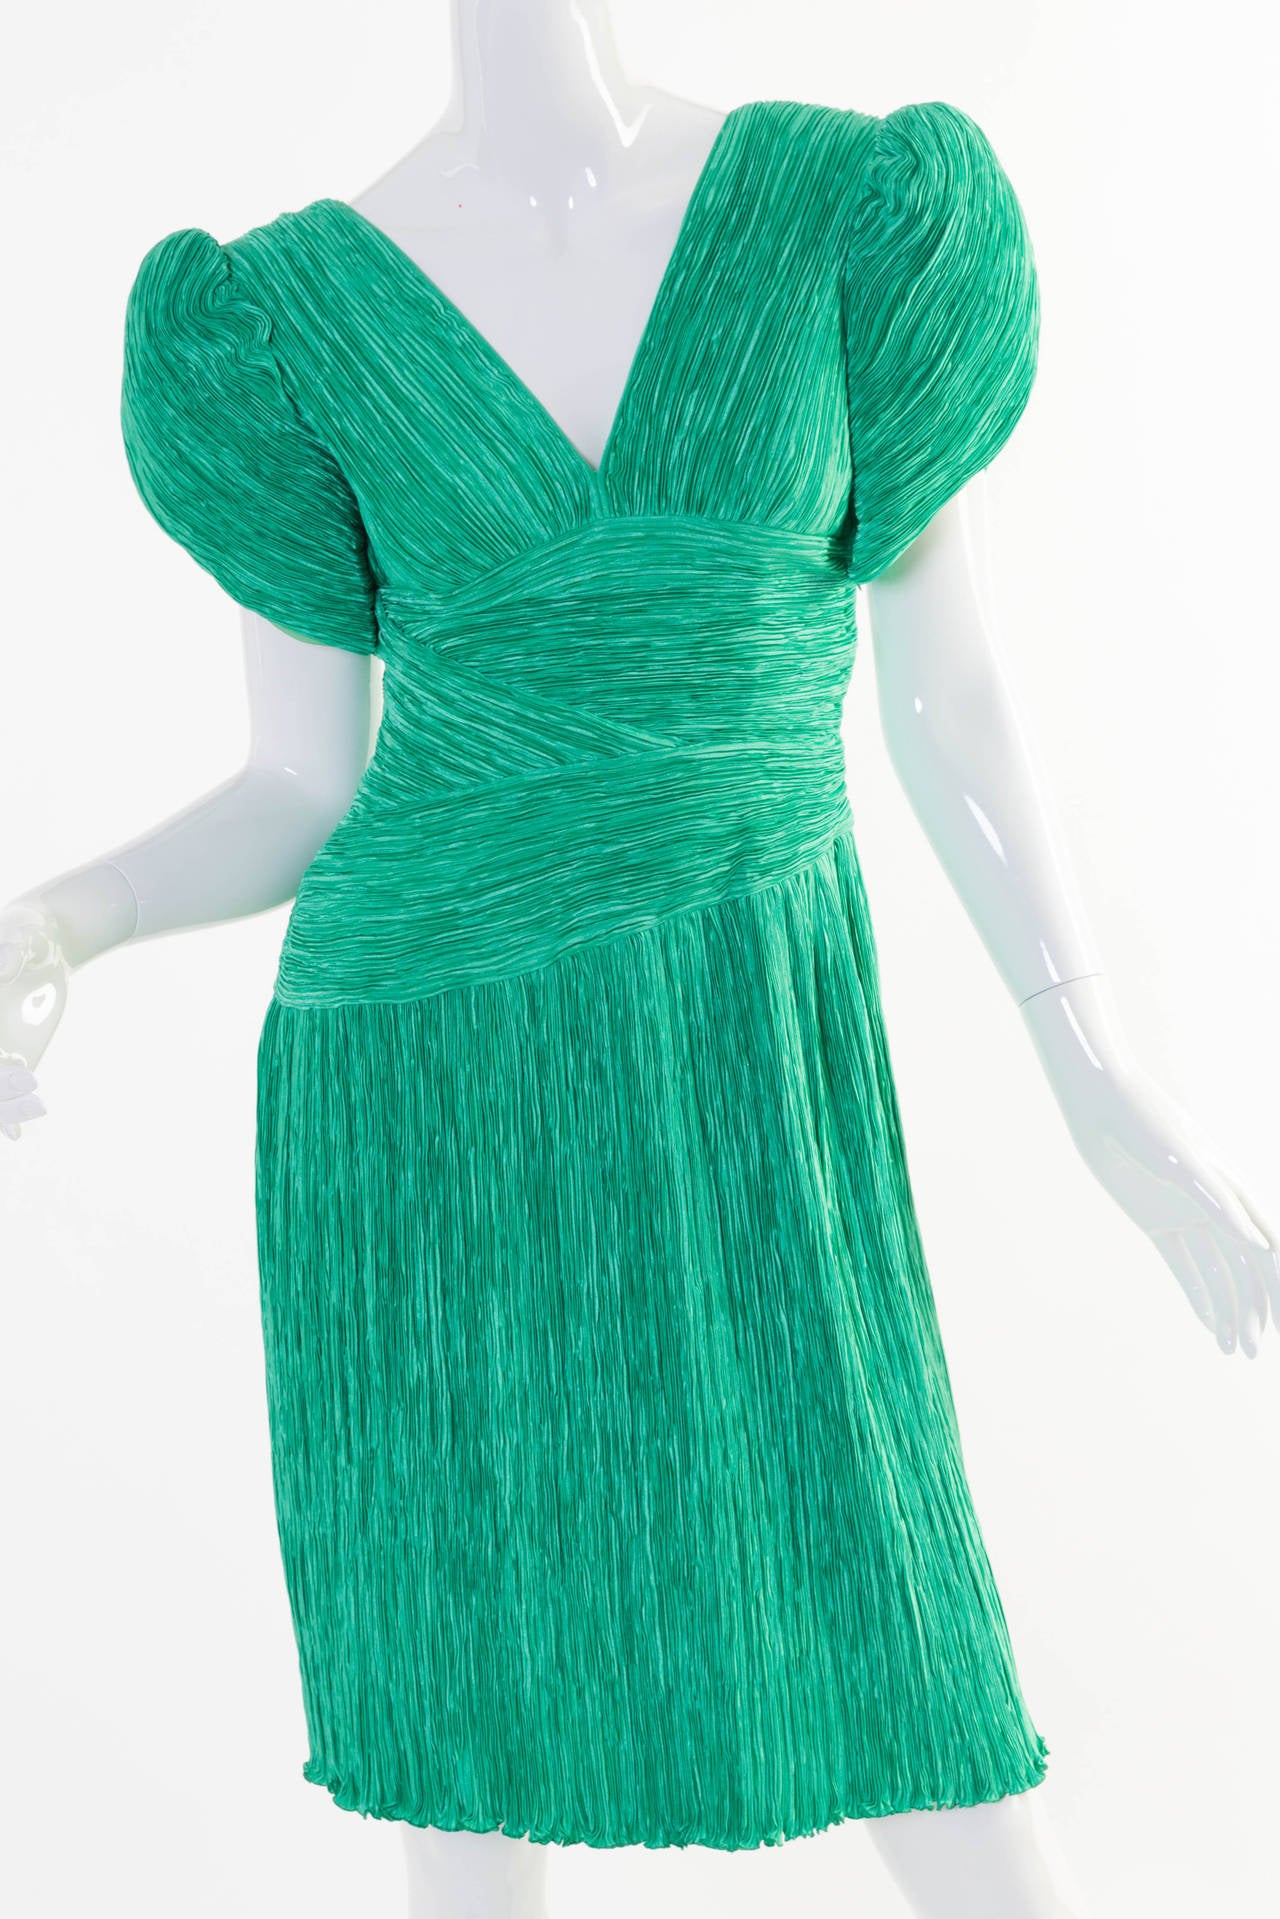 Mary McFadden couture green fortuny pleat dress.
The dress is lined throughout the bodice in a green silky feeling fabric, the sleeves are lined in organza and the skirt portion is unlined.
Closes on the side with a hidden zipper.
This dress is in